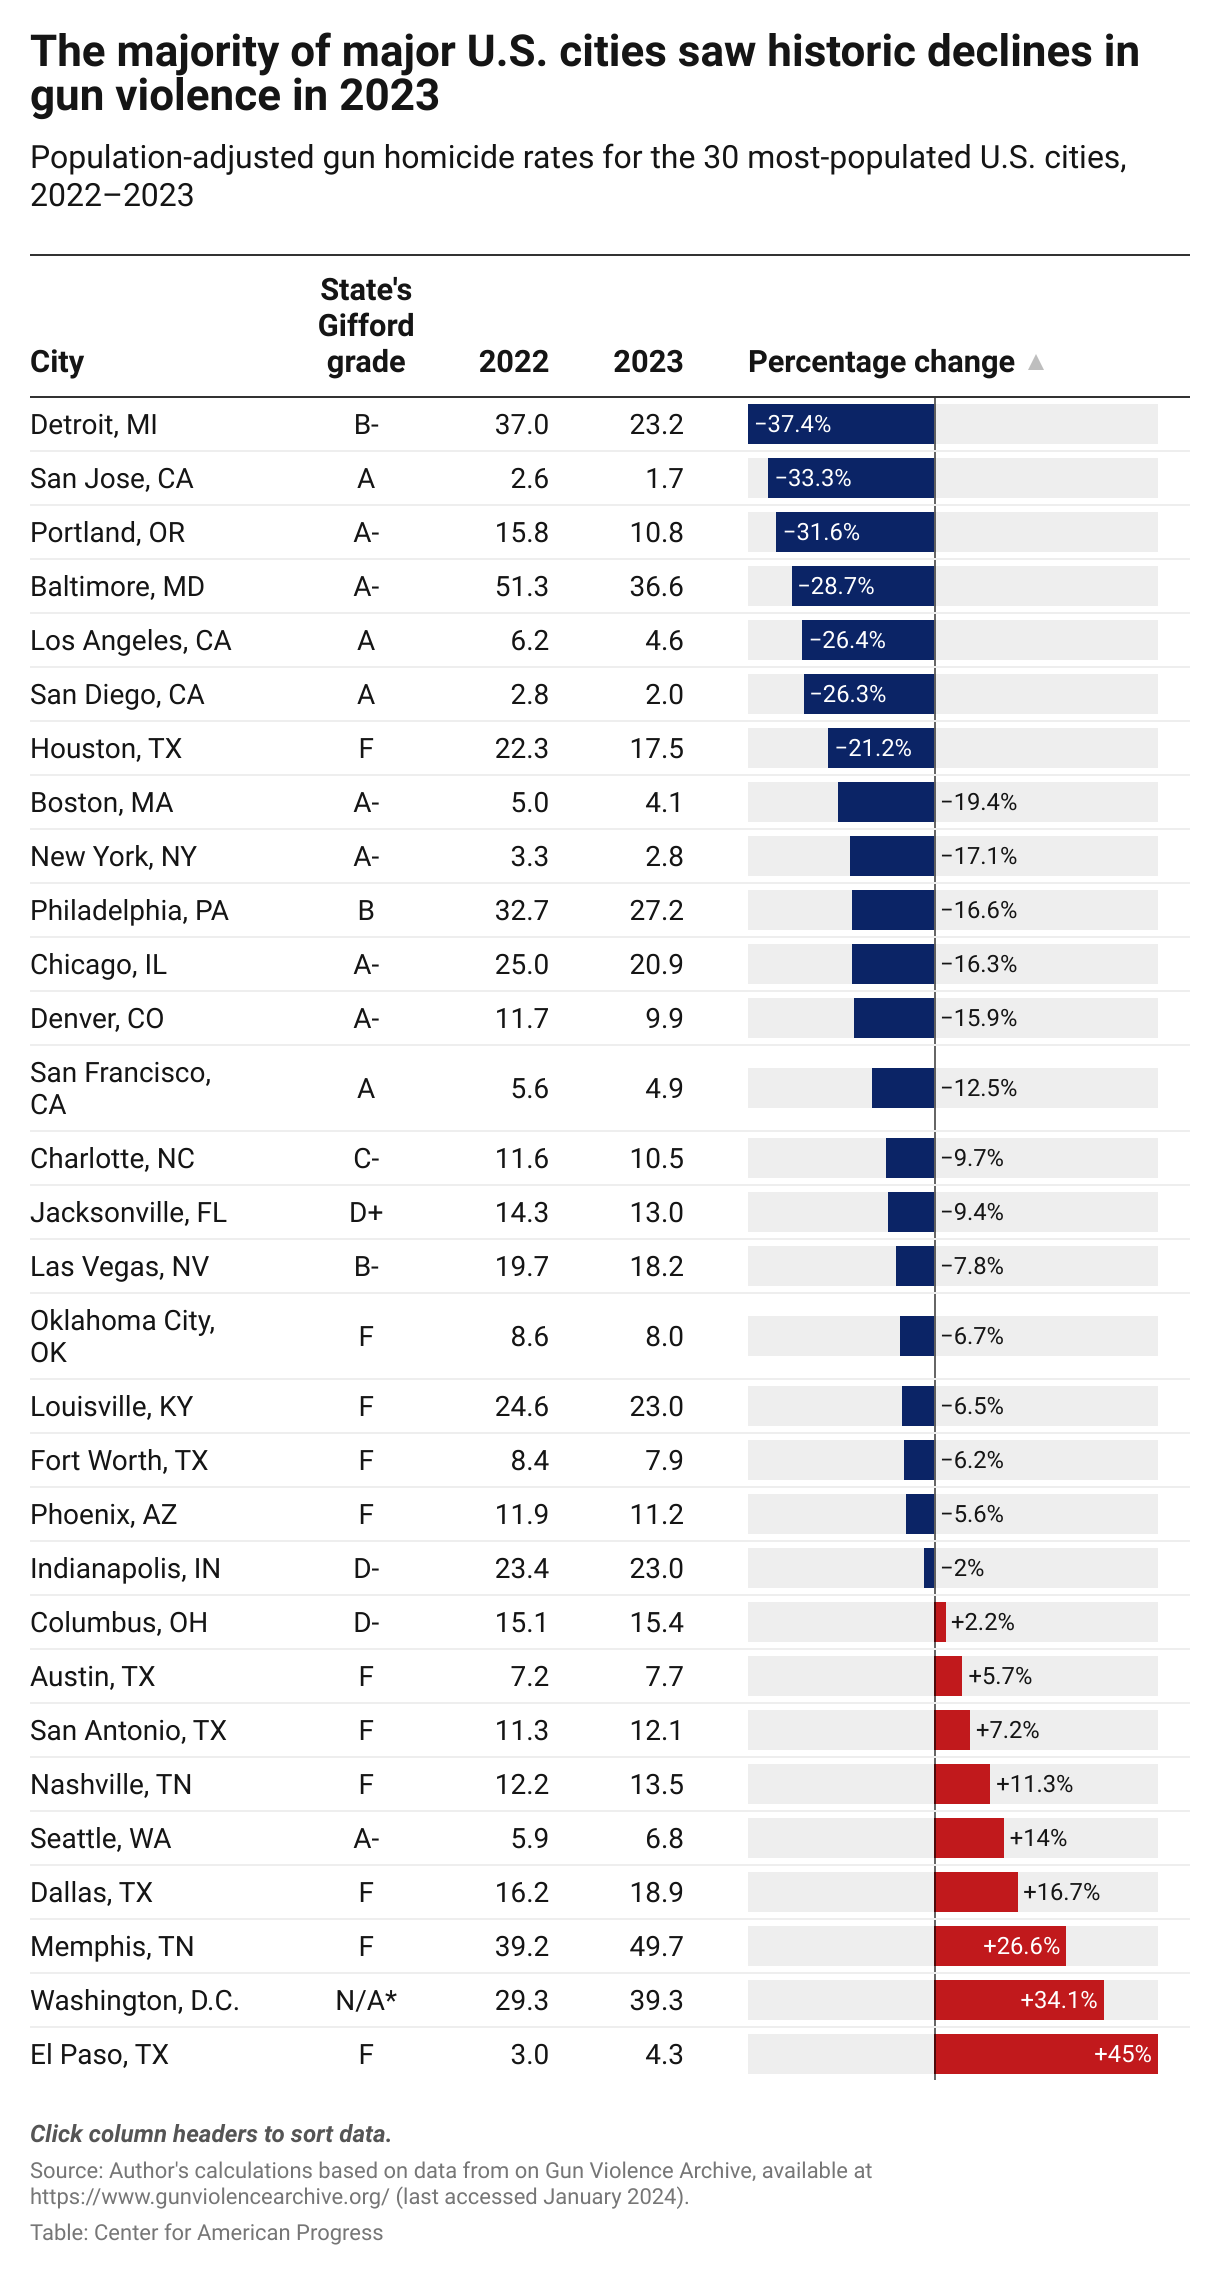 Table comparing population-adjusted gun homicide rates for the top 30 U.S. cities based on population size, showing that 13 cities saw double-digit declines in their gun homicide rate in 2023 compared with 2022.